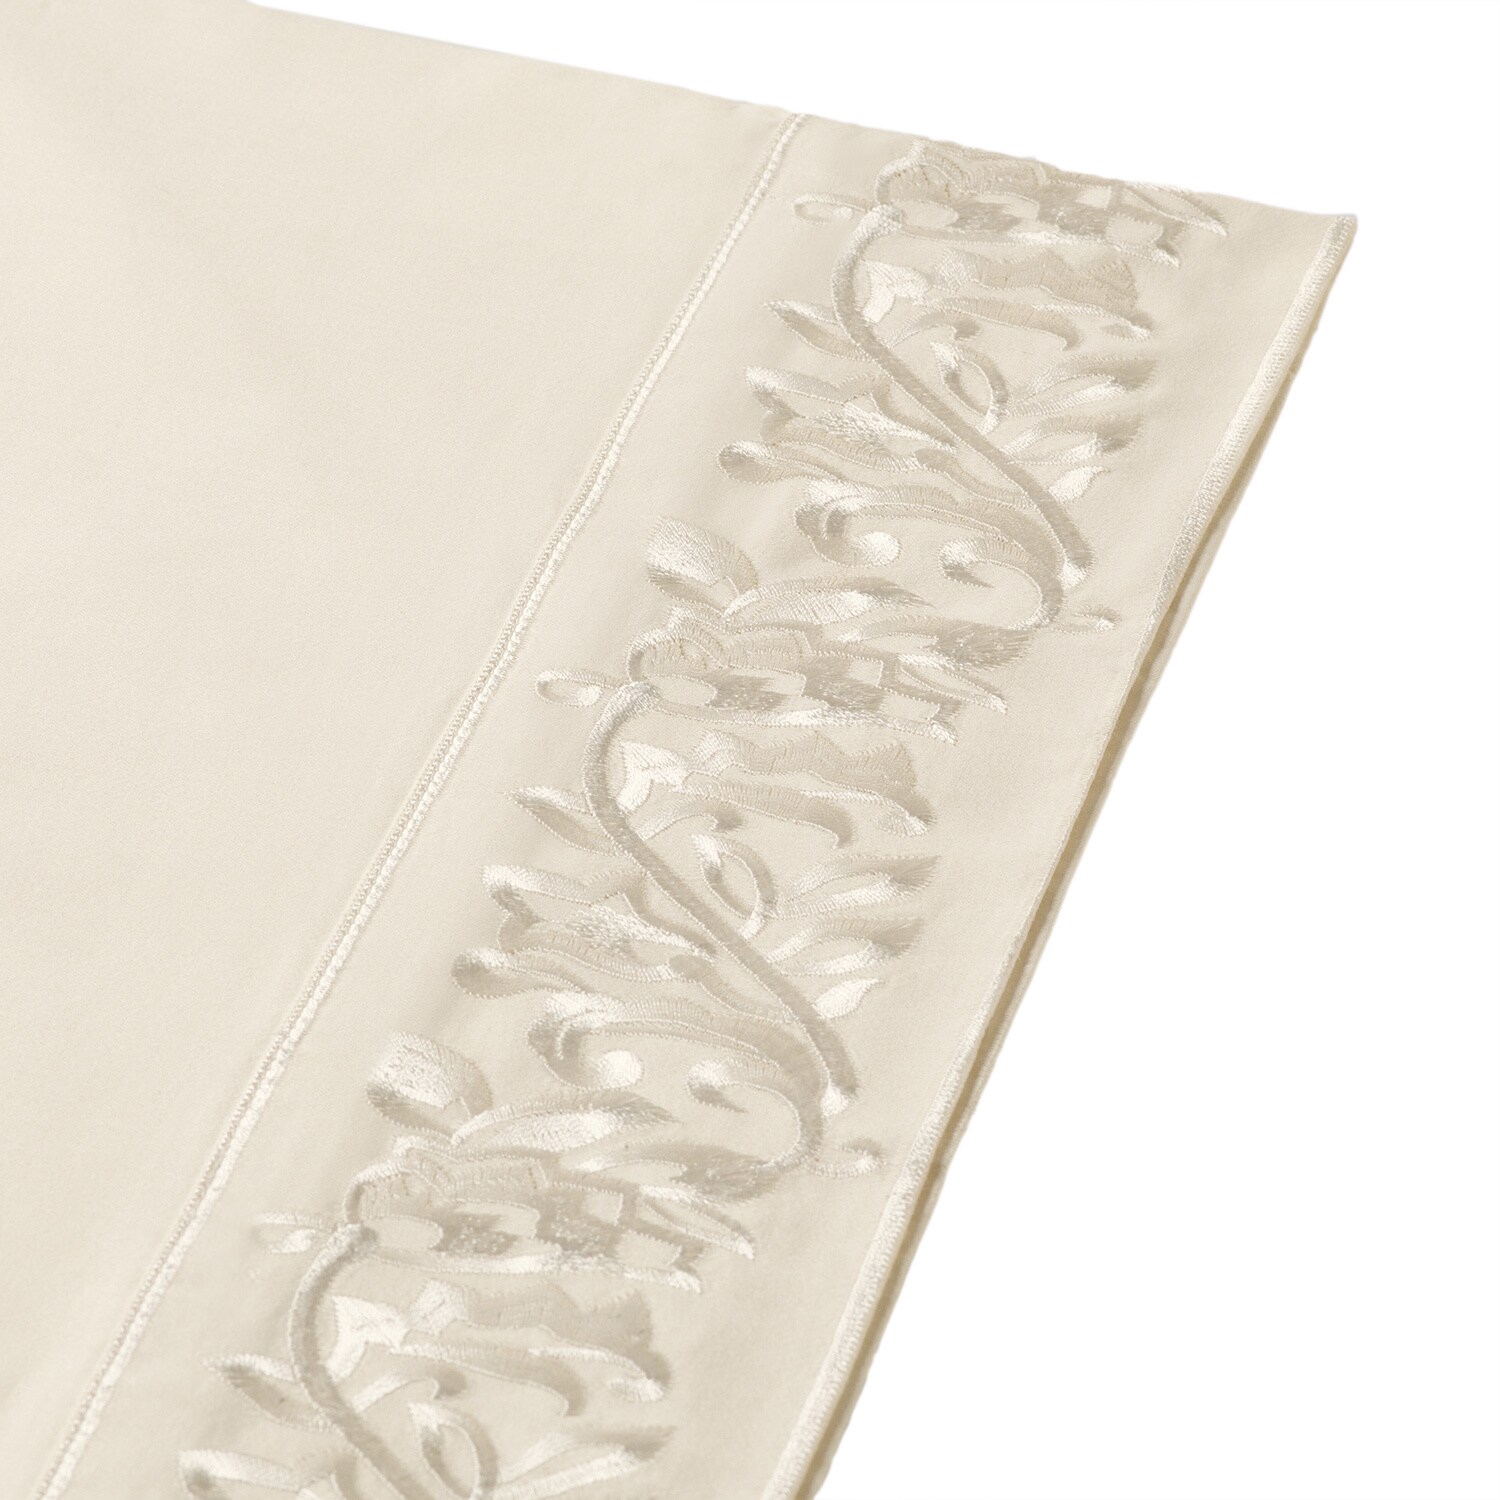 Embroidered 400 Thread Count High Quality Cotton Sateen Bed Sheet 